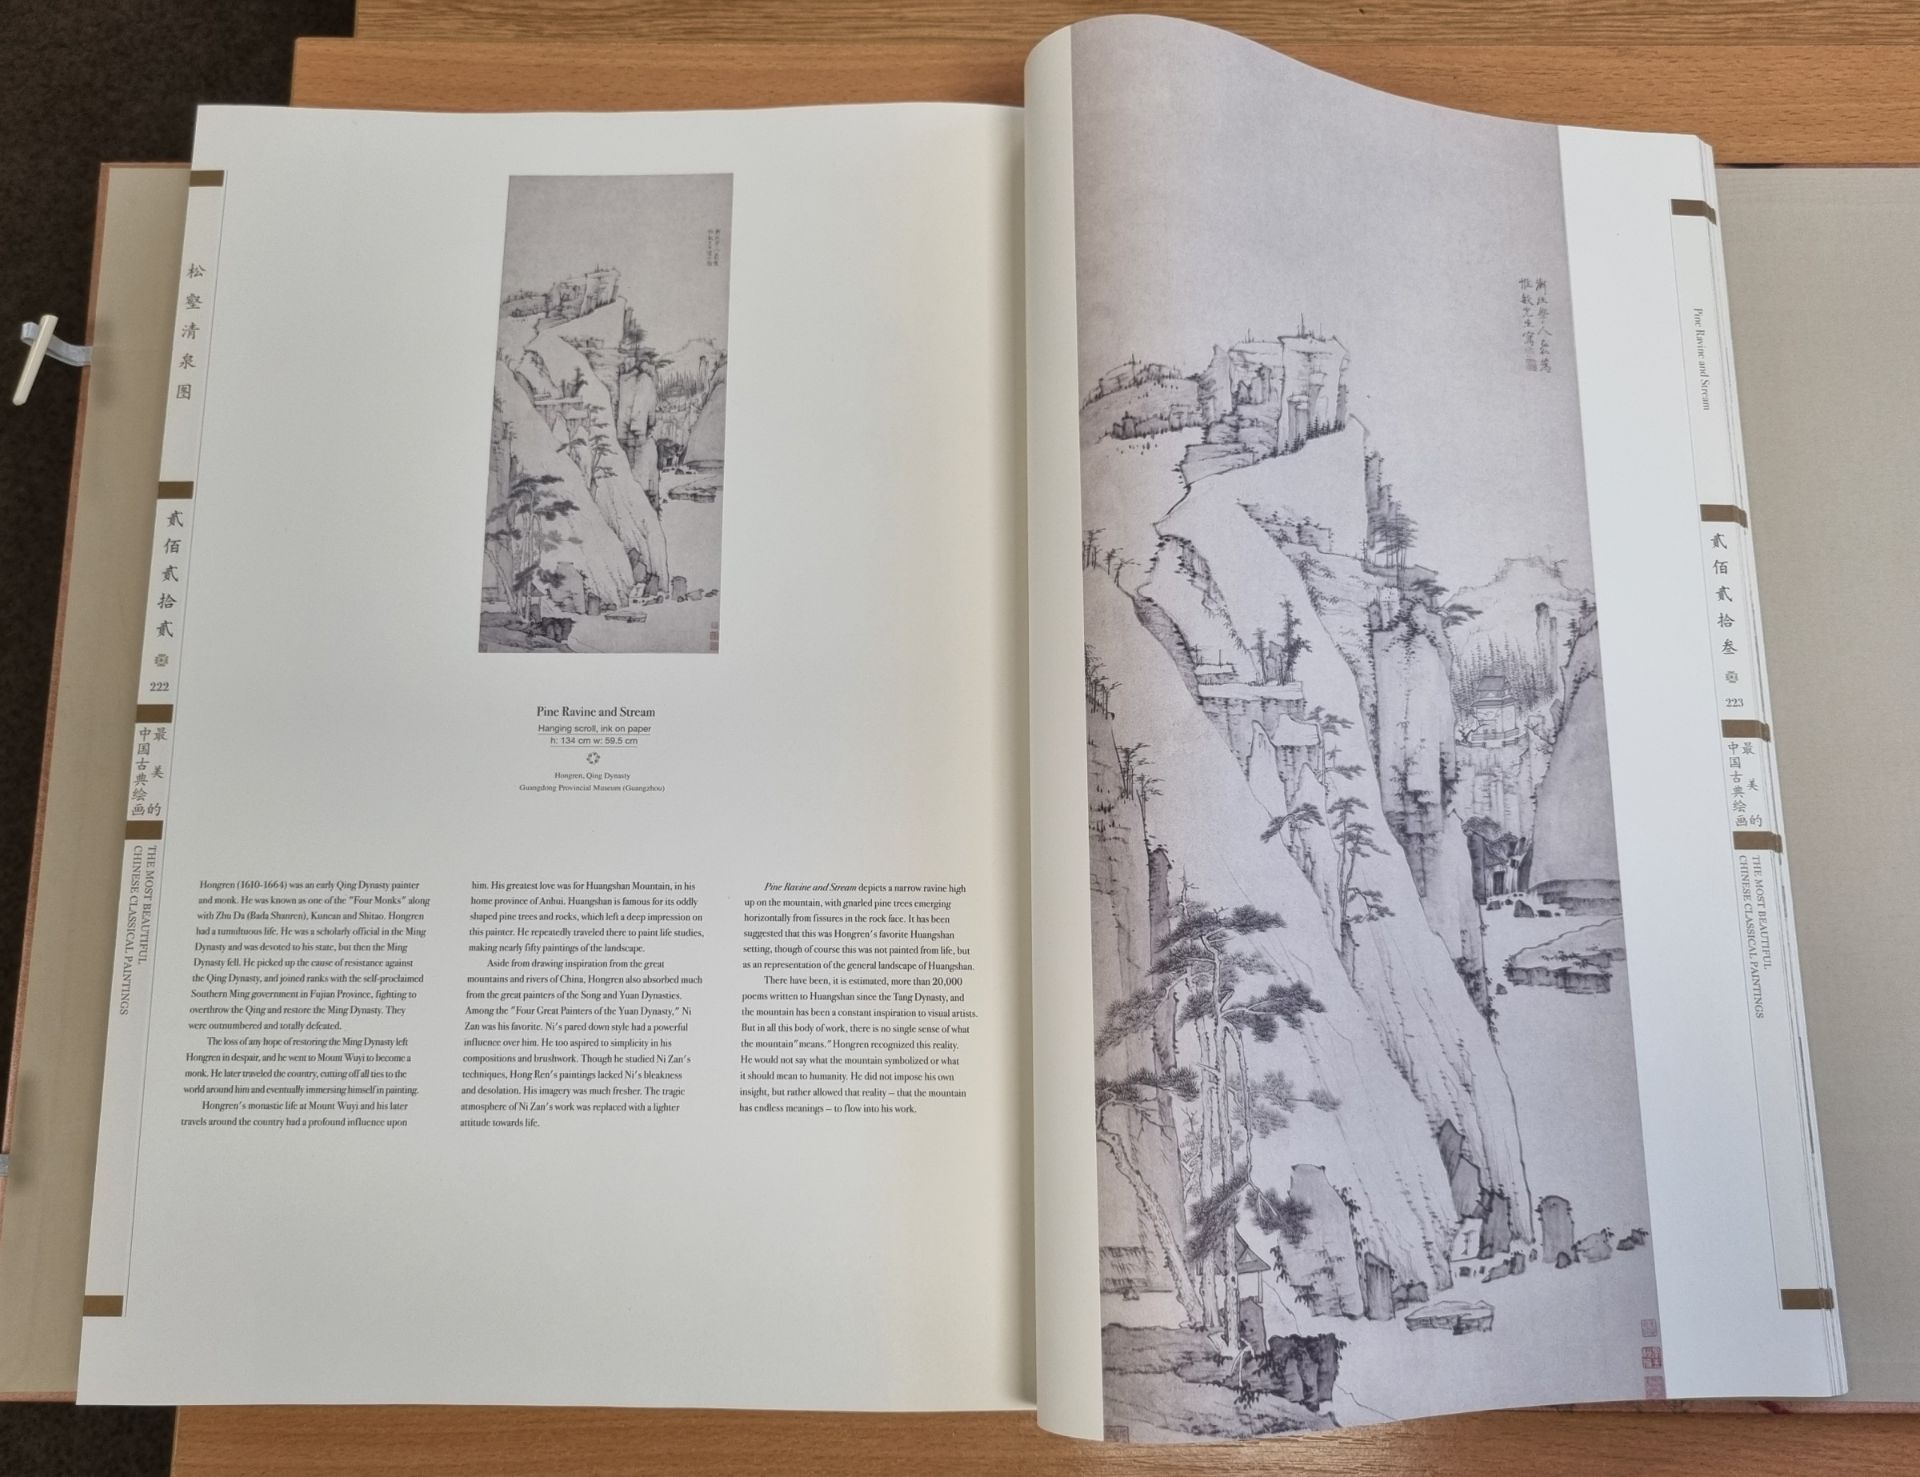 The Most beautiful Chinese classical paintings hardcover book - Image 6 of 7